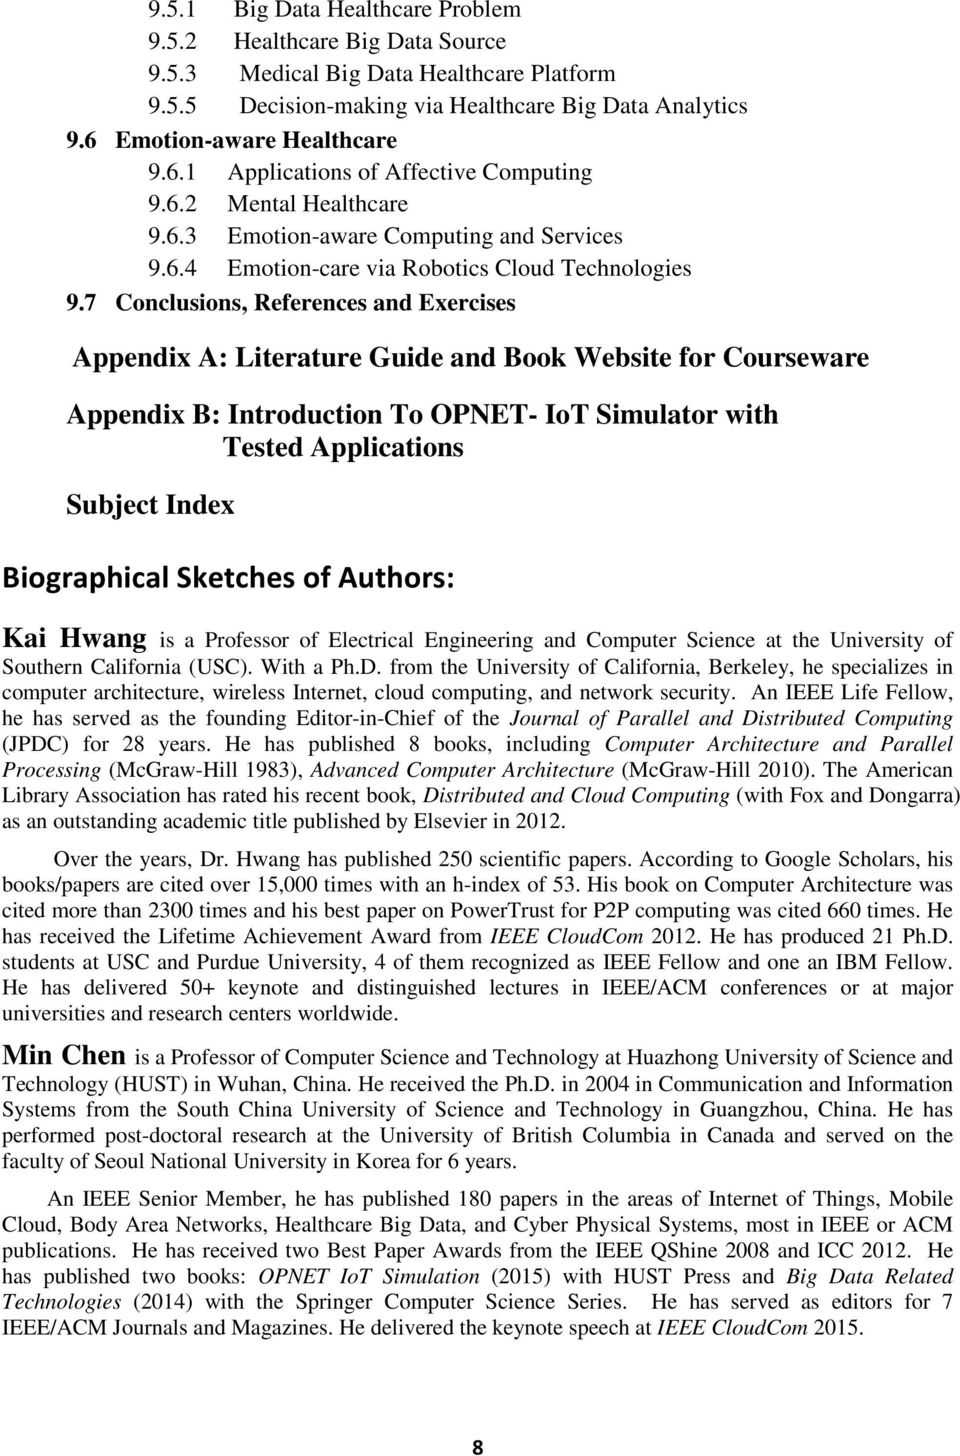 7 Conclusions, References and Exercises Appendix A: Literature Guide and Book Website for Courseware Appendix B: Introduction To OPNET- IoT Simulator with Tested Applications Subject Index